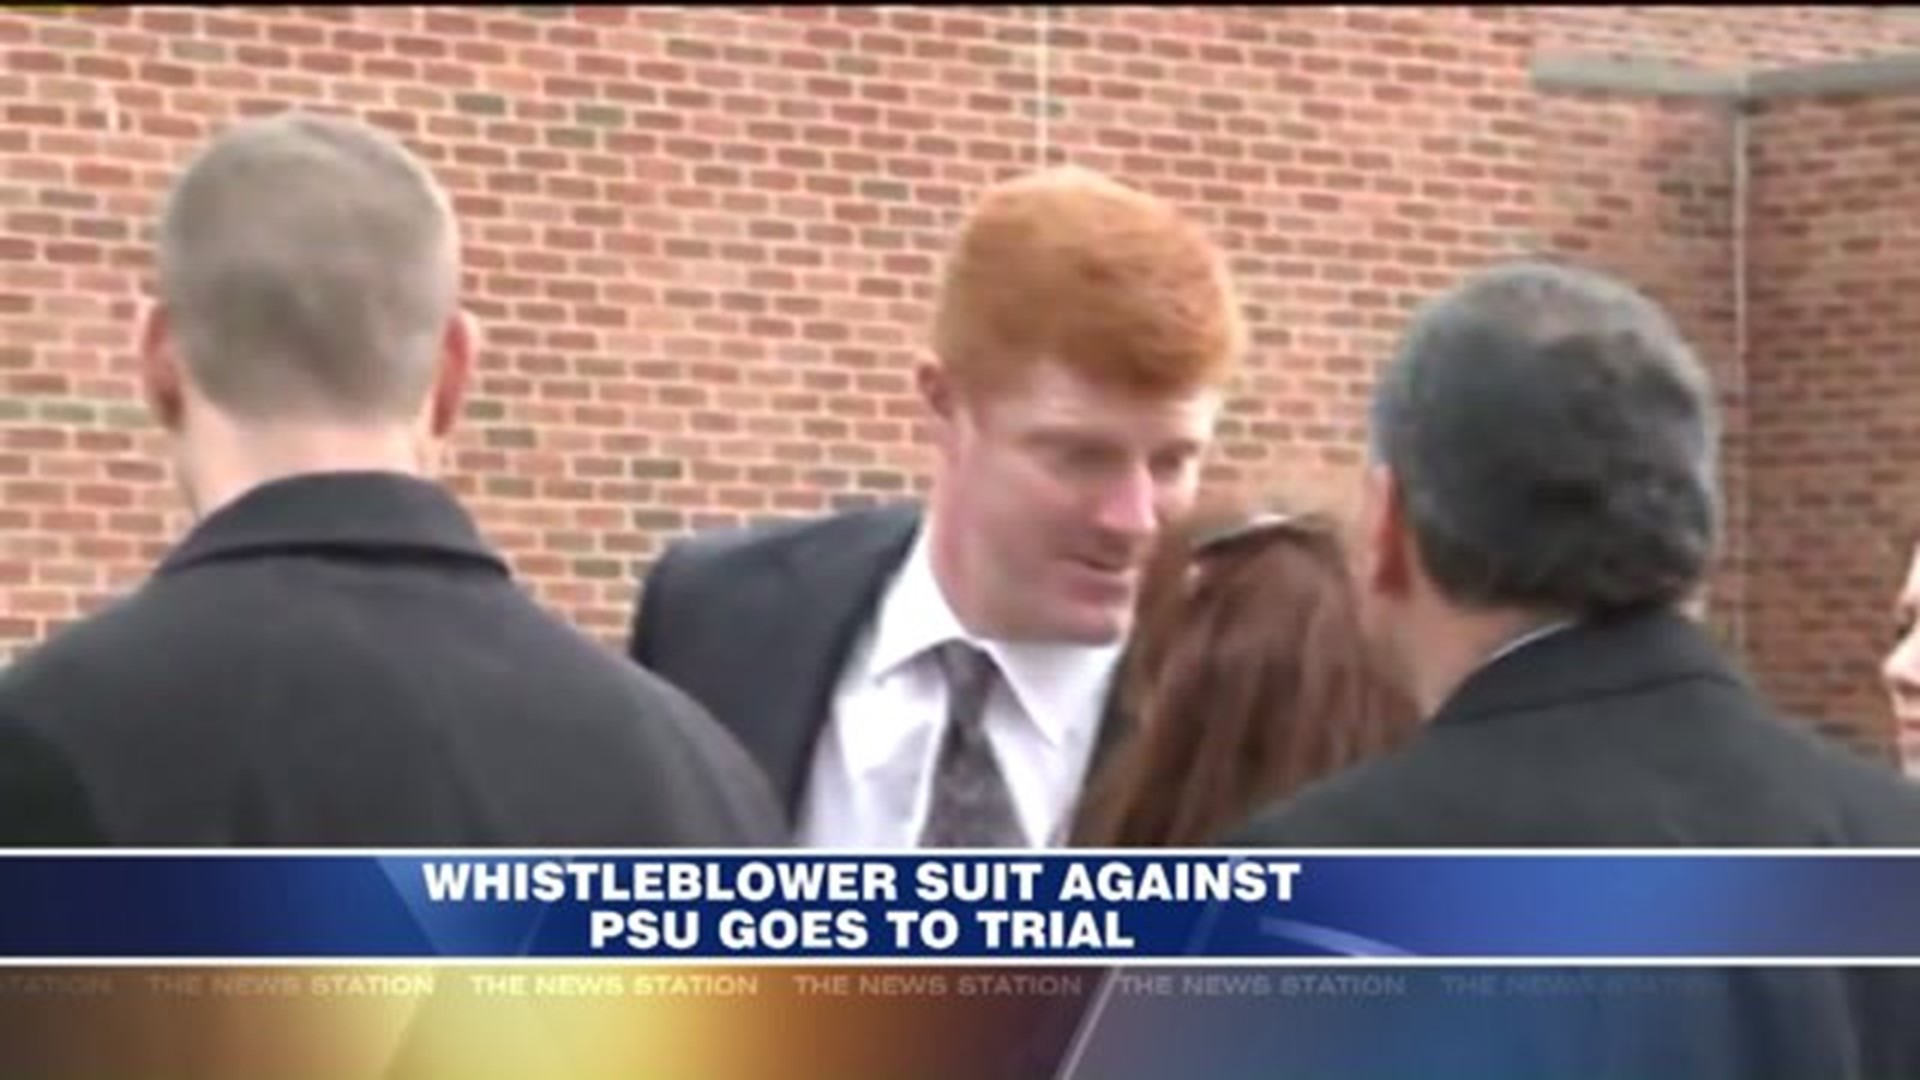 McQueary Whistleblower Lawsuit Against Penn State Goes to Trial